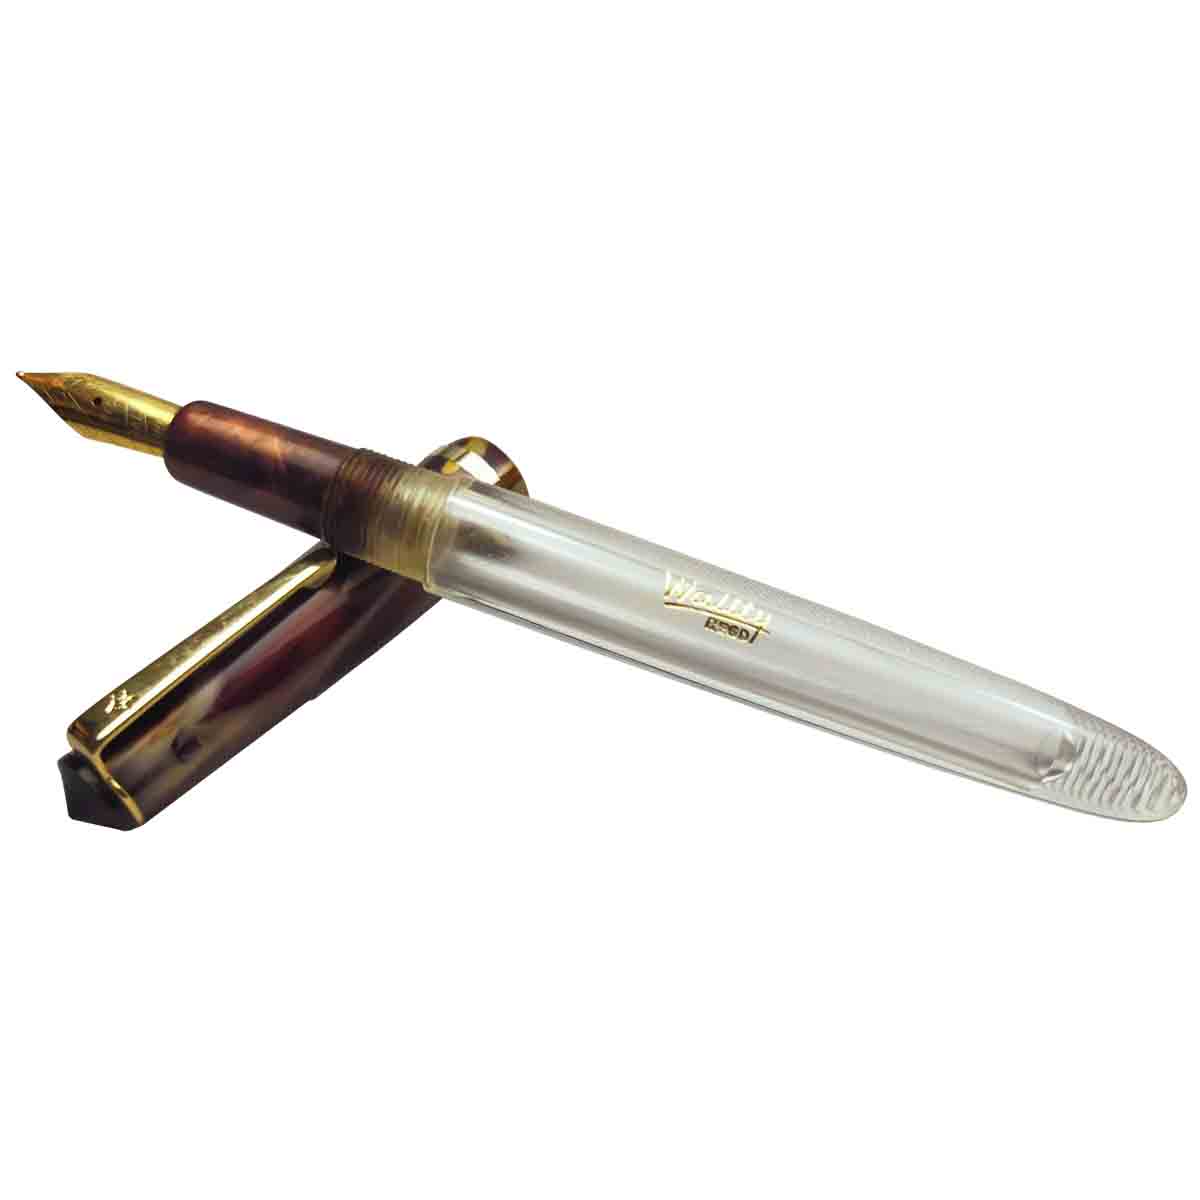 Airmail 64T - Wality Model: 13852 Transparent body with brown color wood finish cap with golden clip fine tip fountain pen